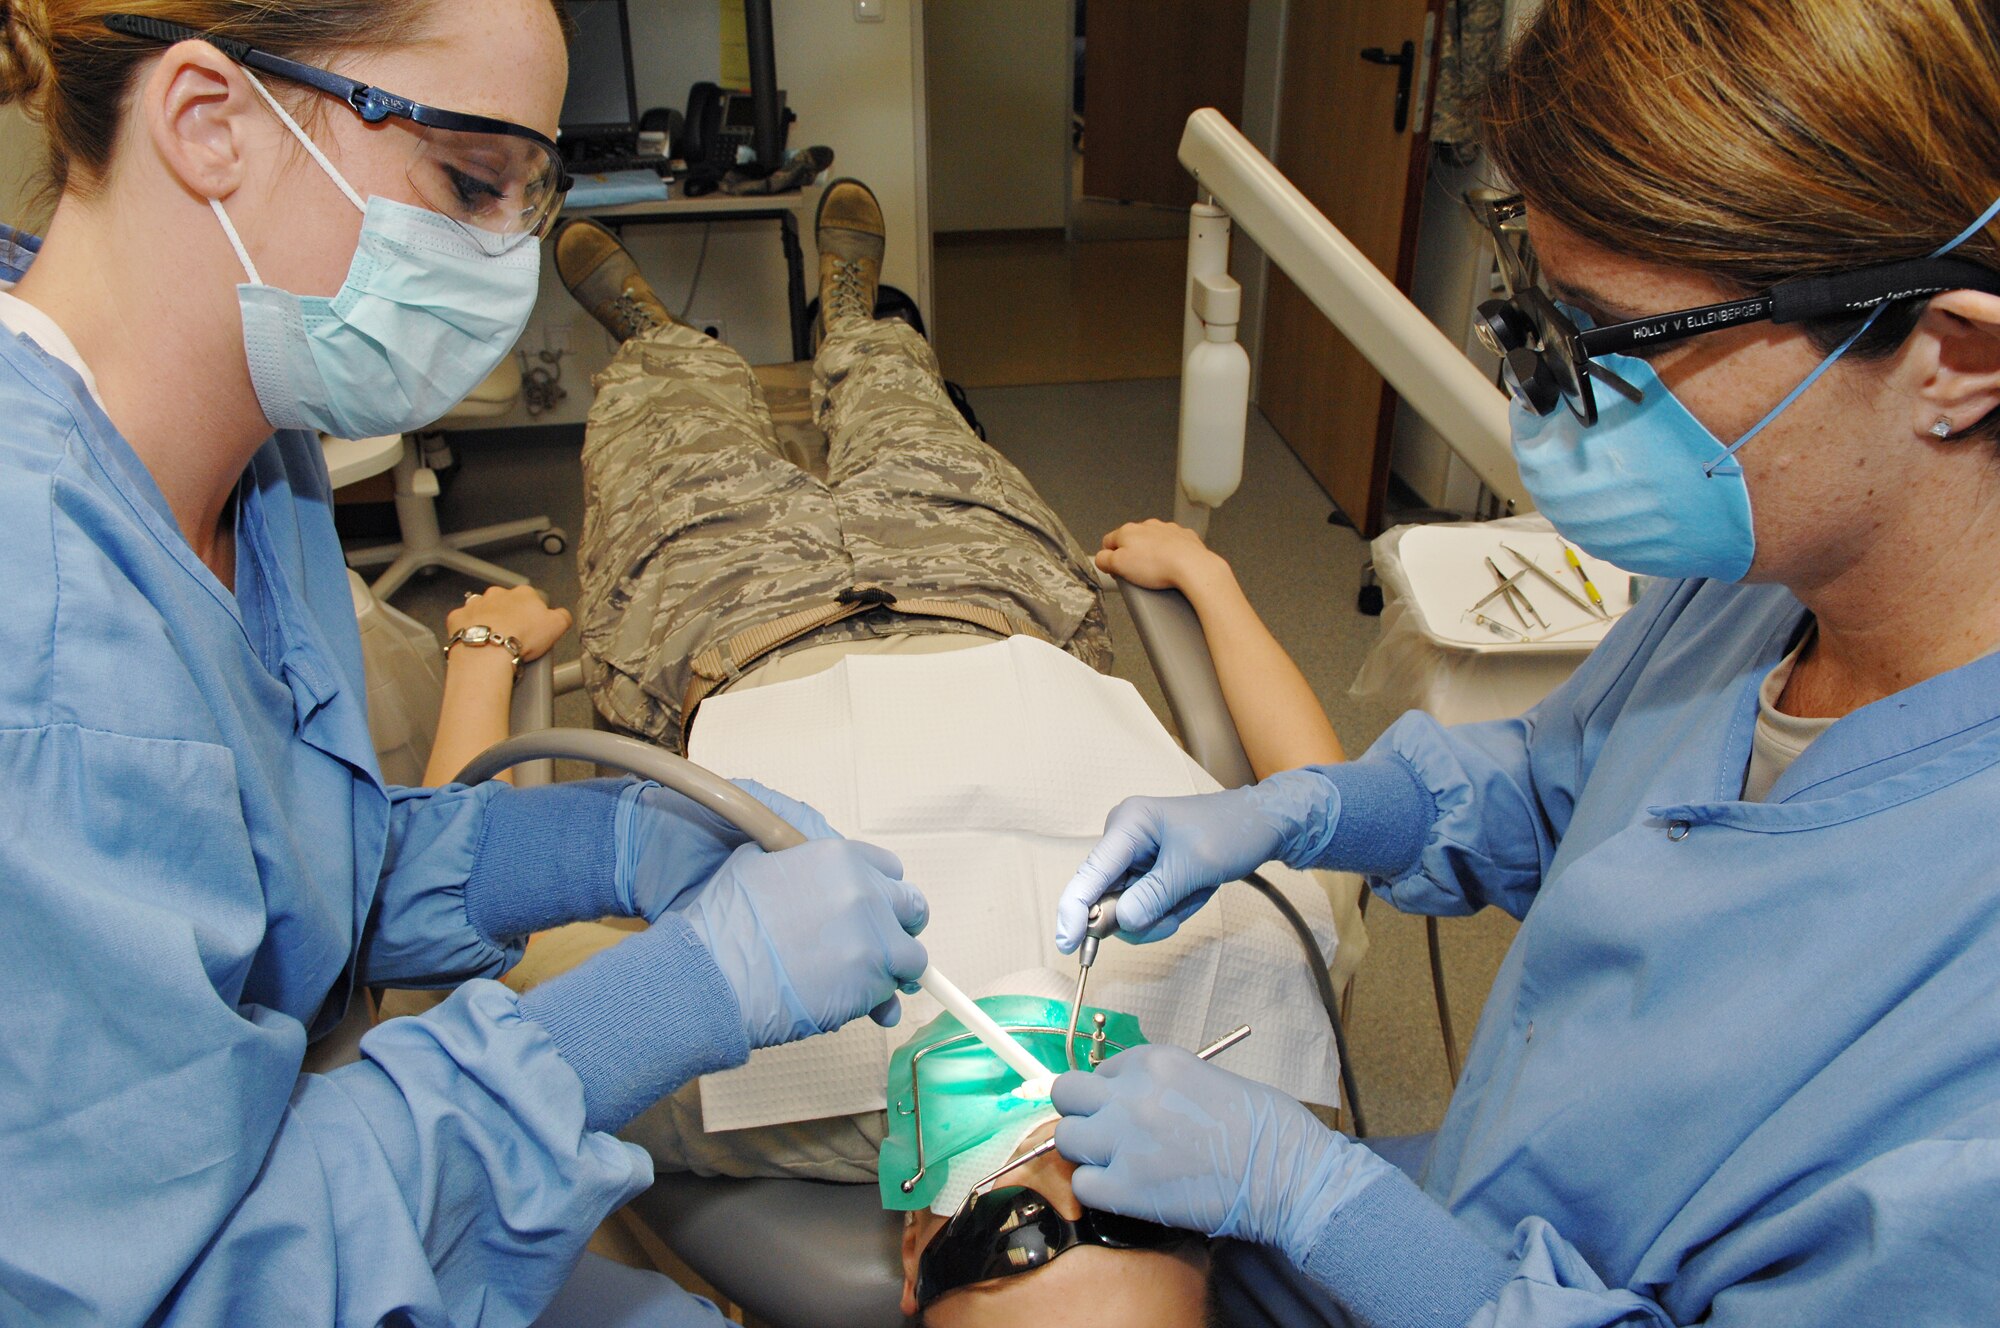 SPANGDAHLEM AIR BASE, Germany – Lt. Col. (Dr.) Holly Ellenburger (right) and Airman Amy Williams (left), both from the  52nd Dental Squadron, repair a cavity in the mouth of Senior Airman Mica Smith, 606th Air Control Squadron, Aug. 24. (U.S. Air Force photo/Senior Airman Benjamin Wilson)